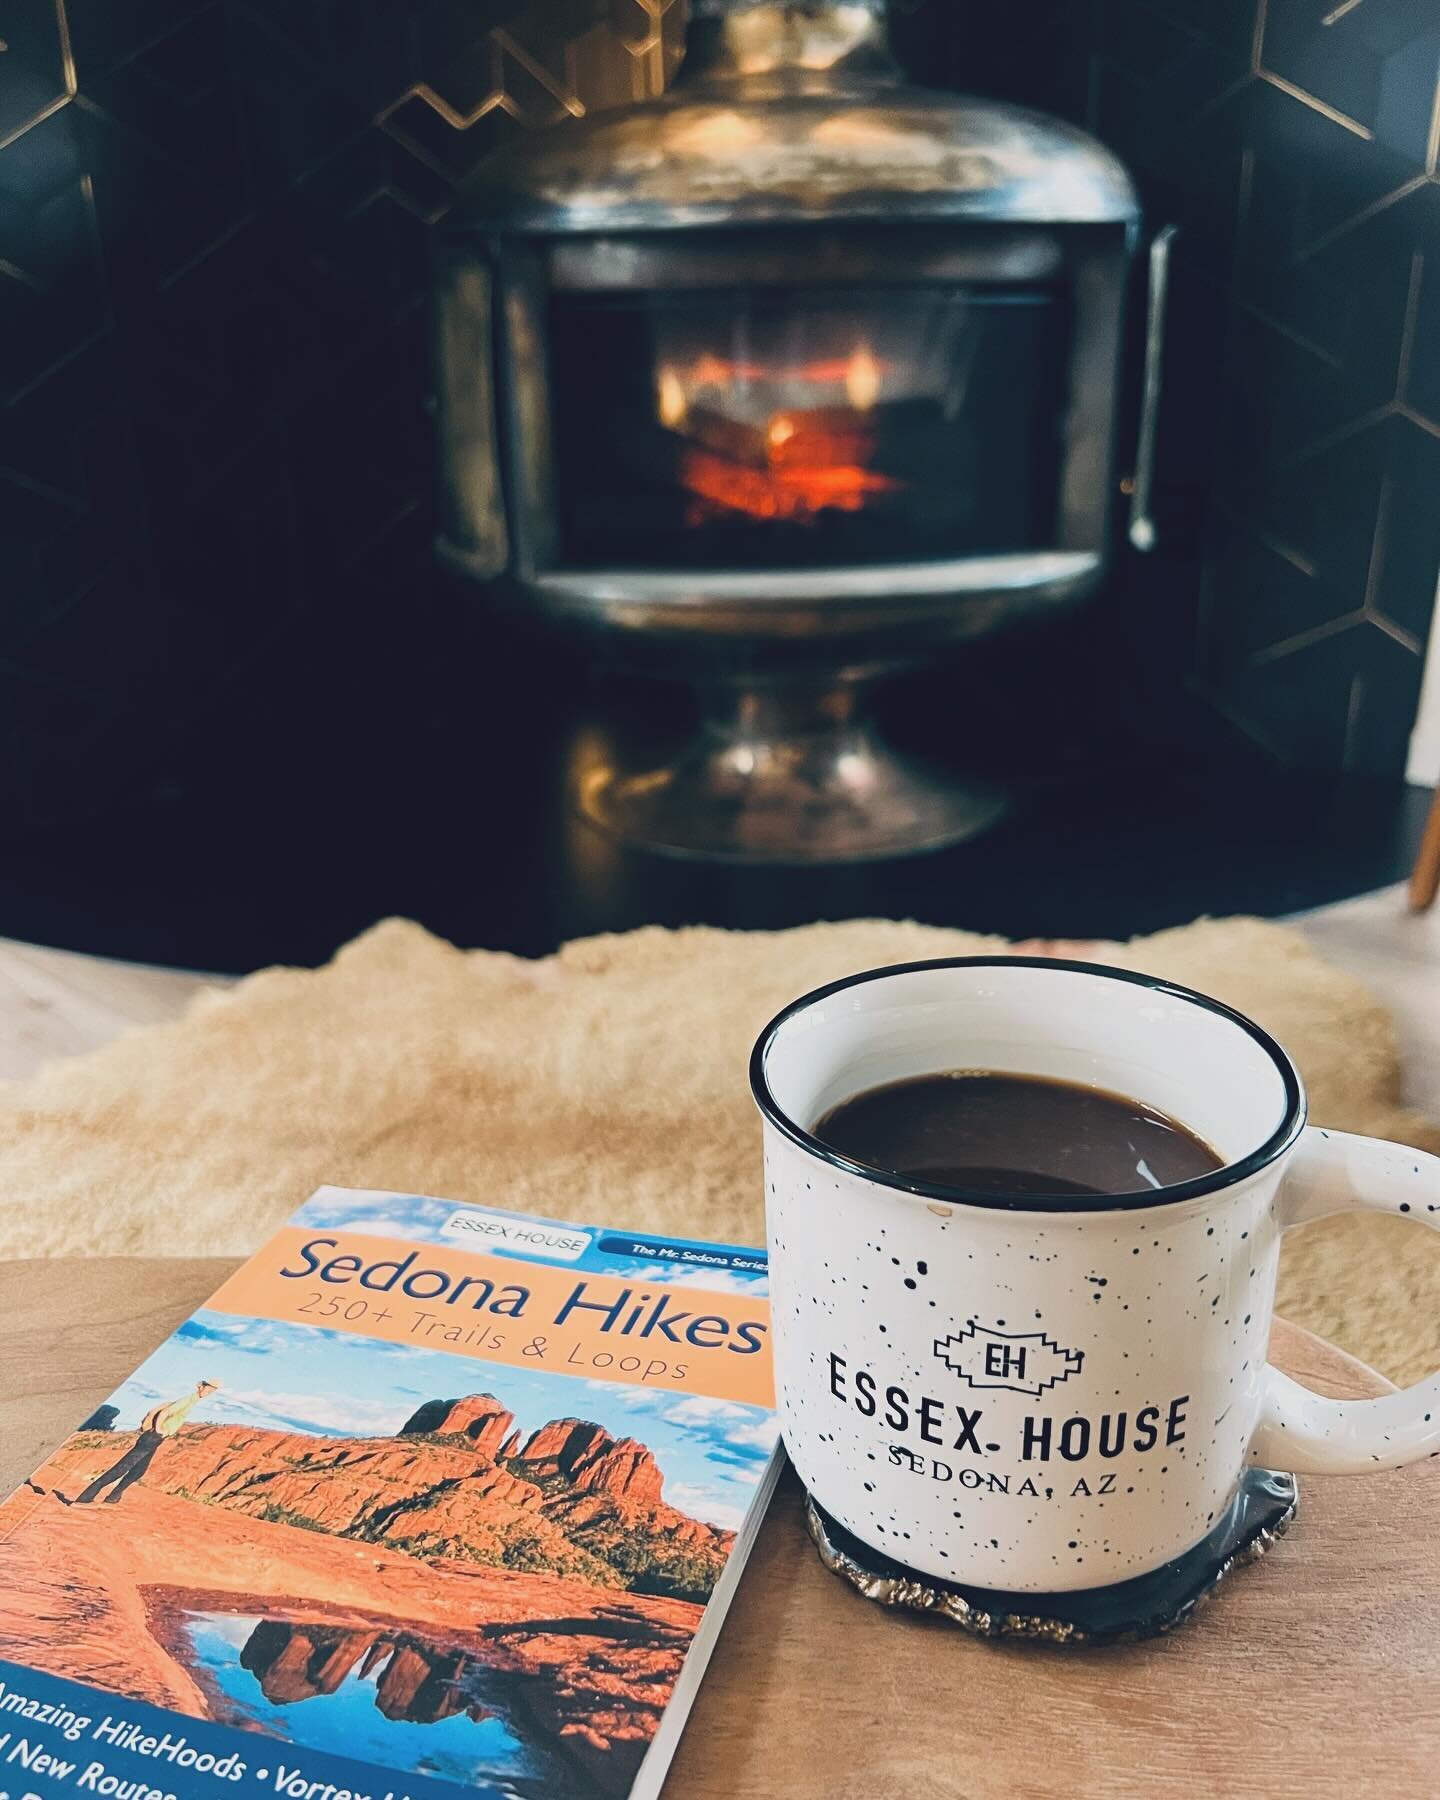 Planning our hikes while getting cosy by the fireplace. #sedona #coffeetime